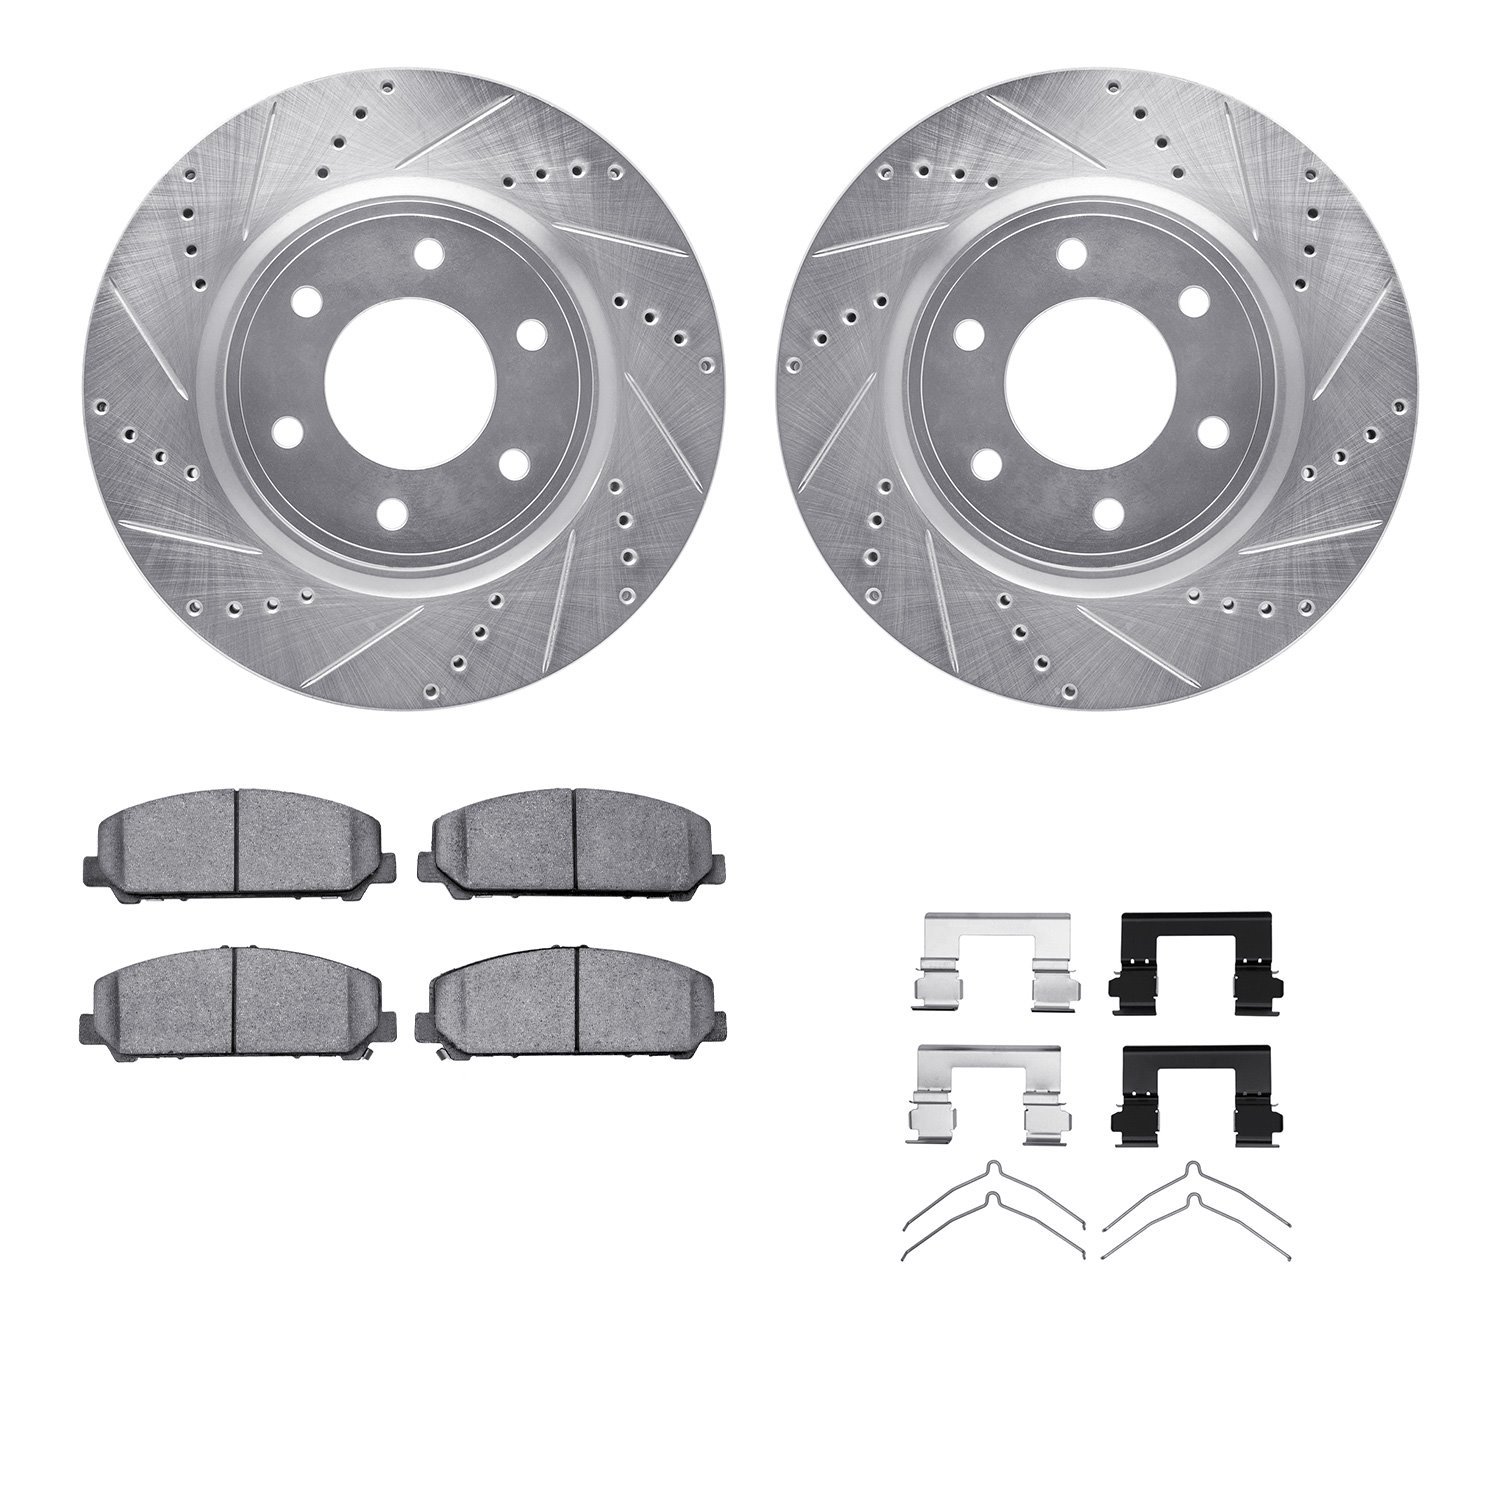 7412-68001 Drilled/Slotted Brake Rotors with Ultimate-Duty Brake Pads Kit & Hardware [Silver], Fits Select Infiniti/Nissan, Posi